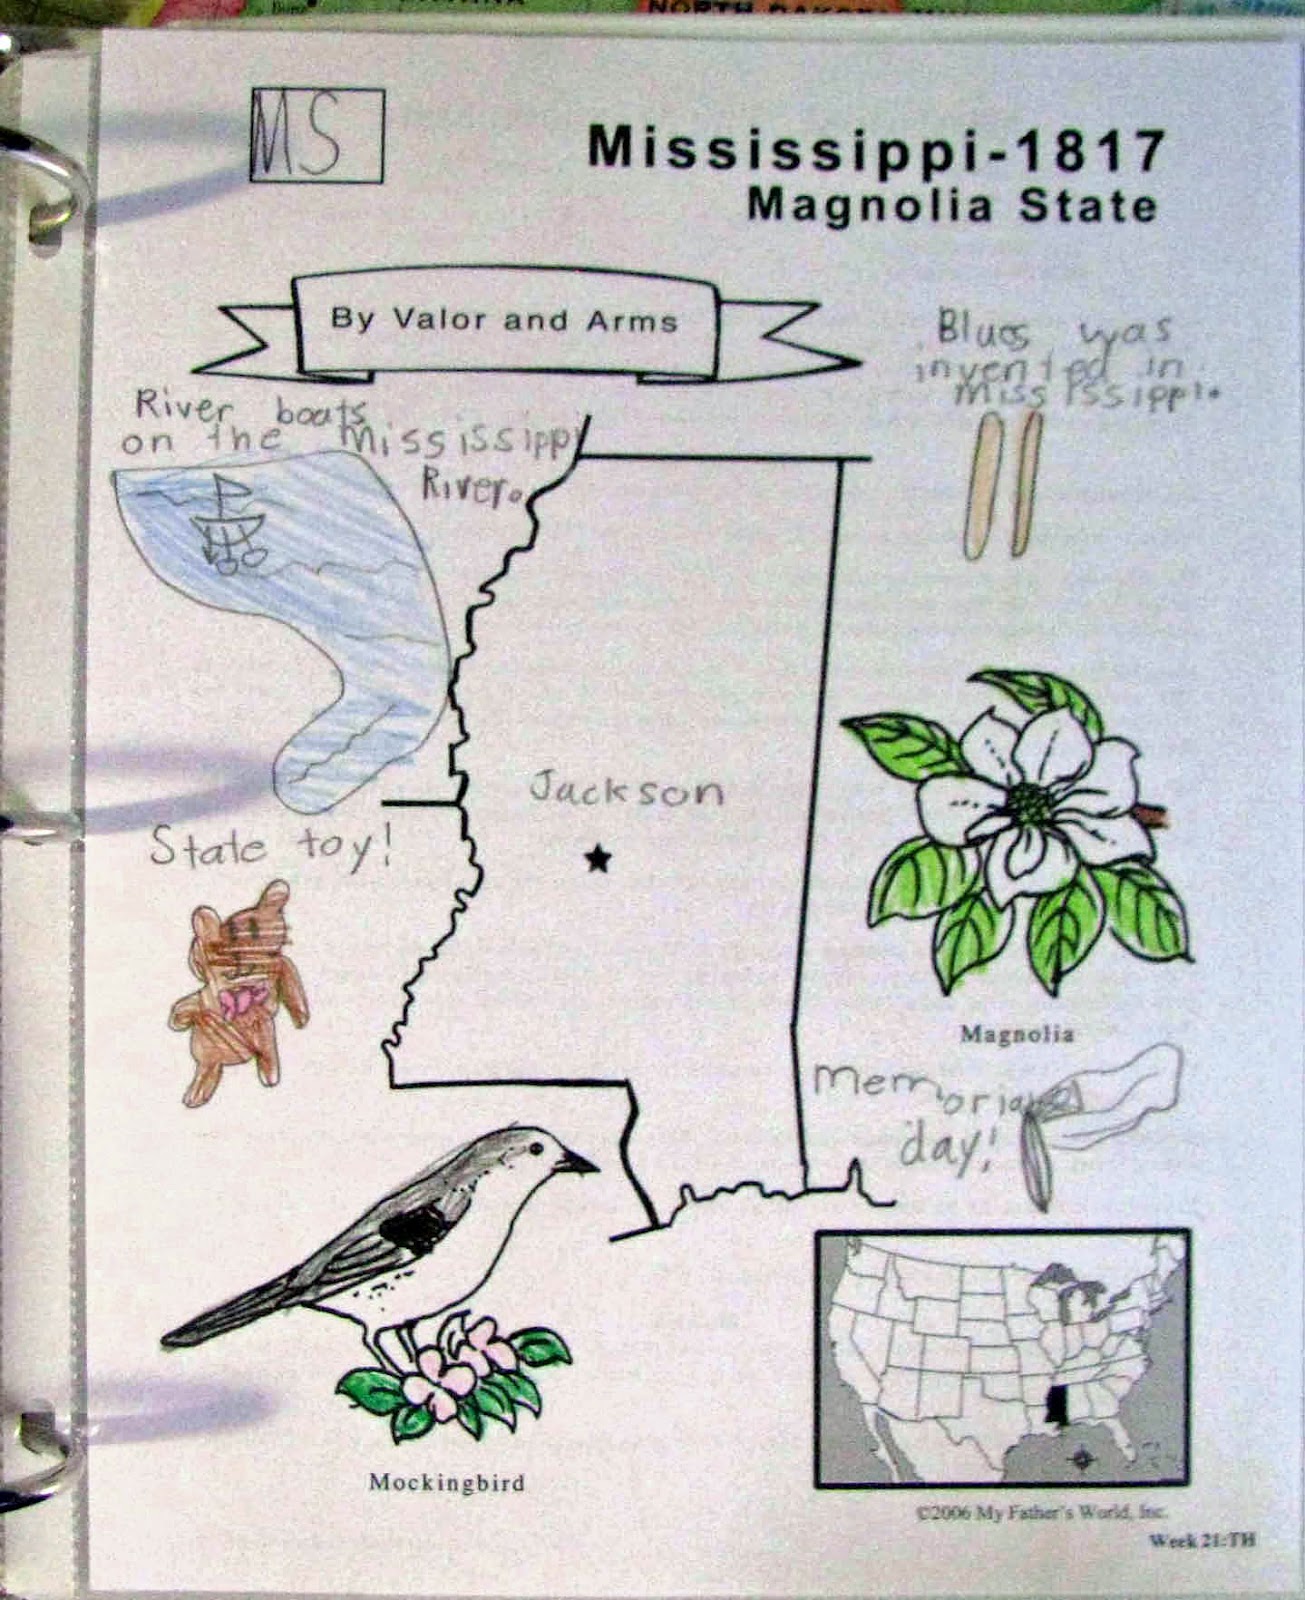 For what is Mississippi known?